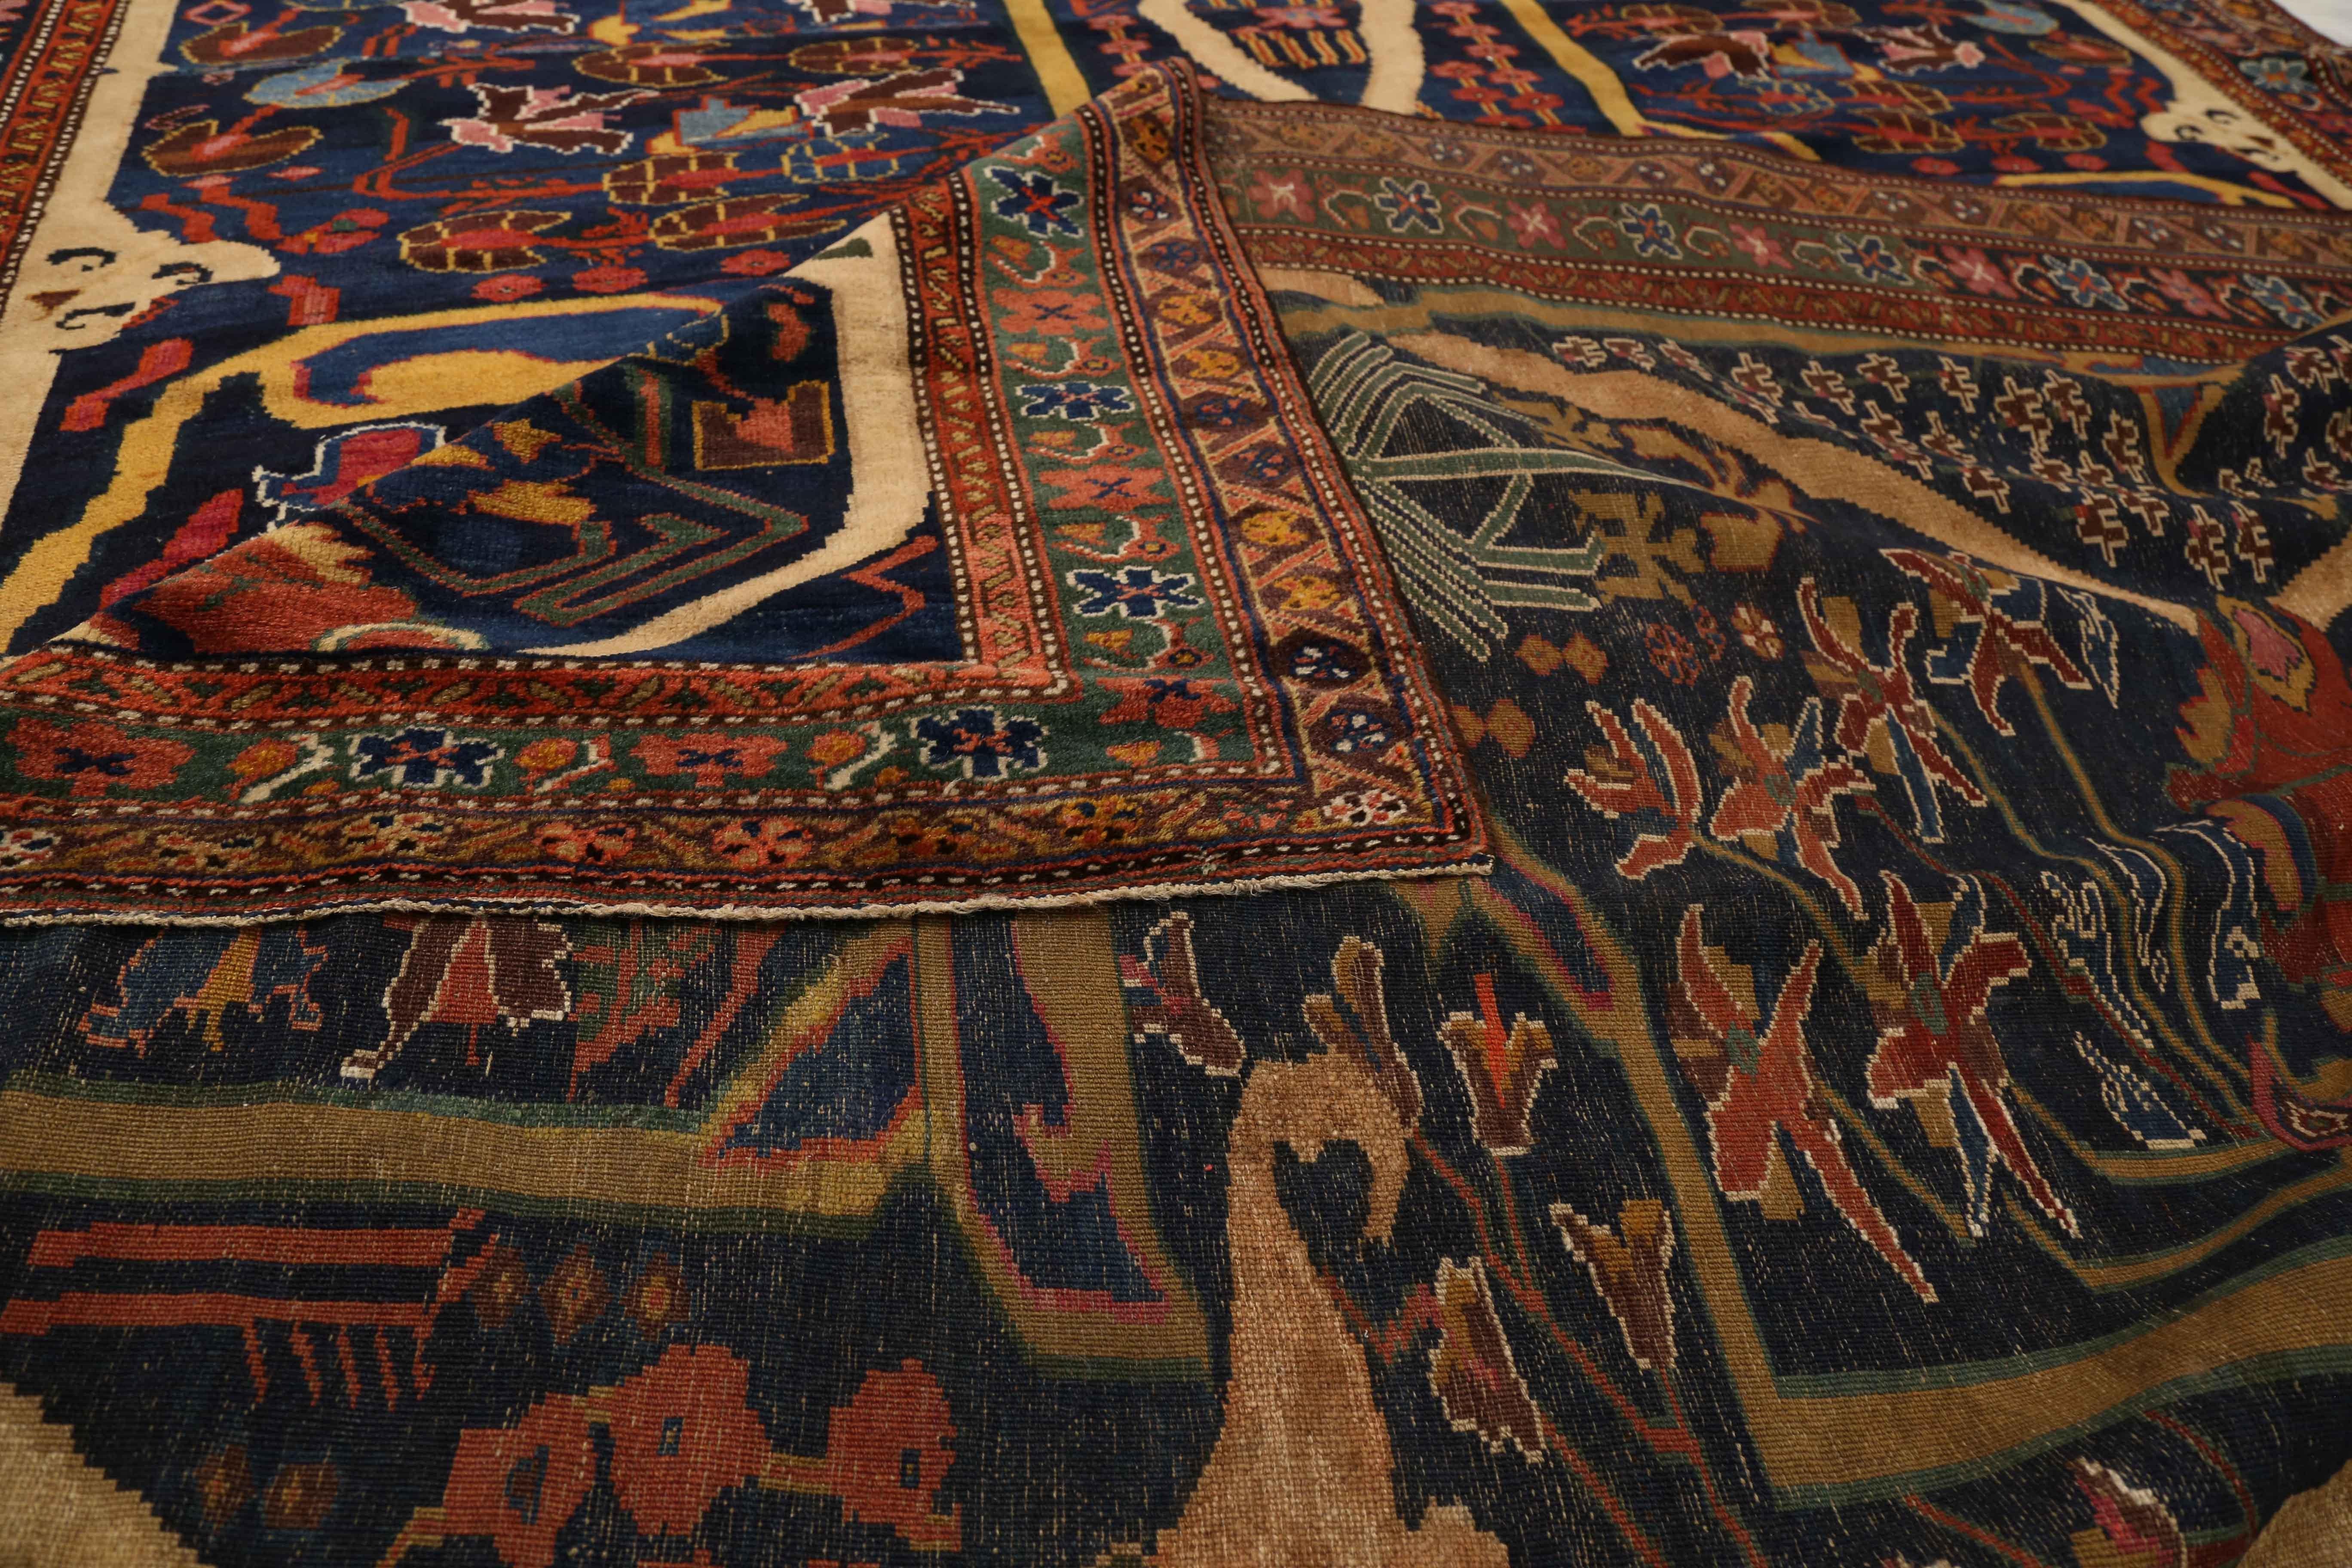 1920s-era antique Persian rug made of the finest wool and vegetable dyes in the region of Bijar in ancient Persia. Using several colors to illustrate the rich texture of the rug, the floral patterns exhibited here will give a welcome contrast to